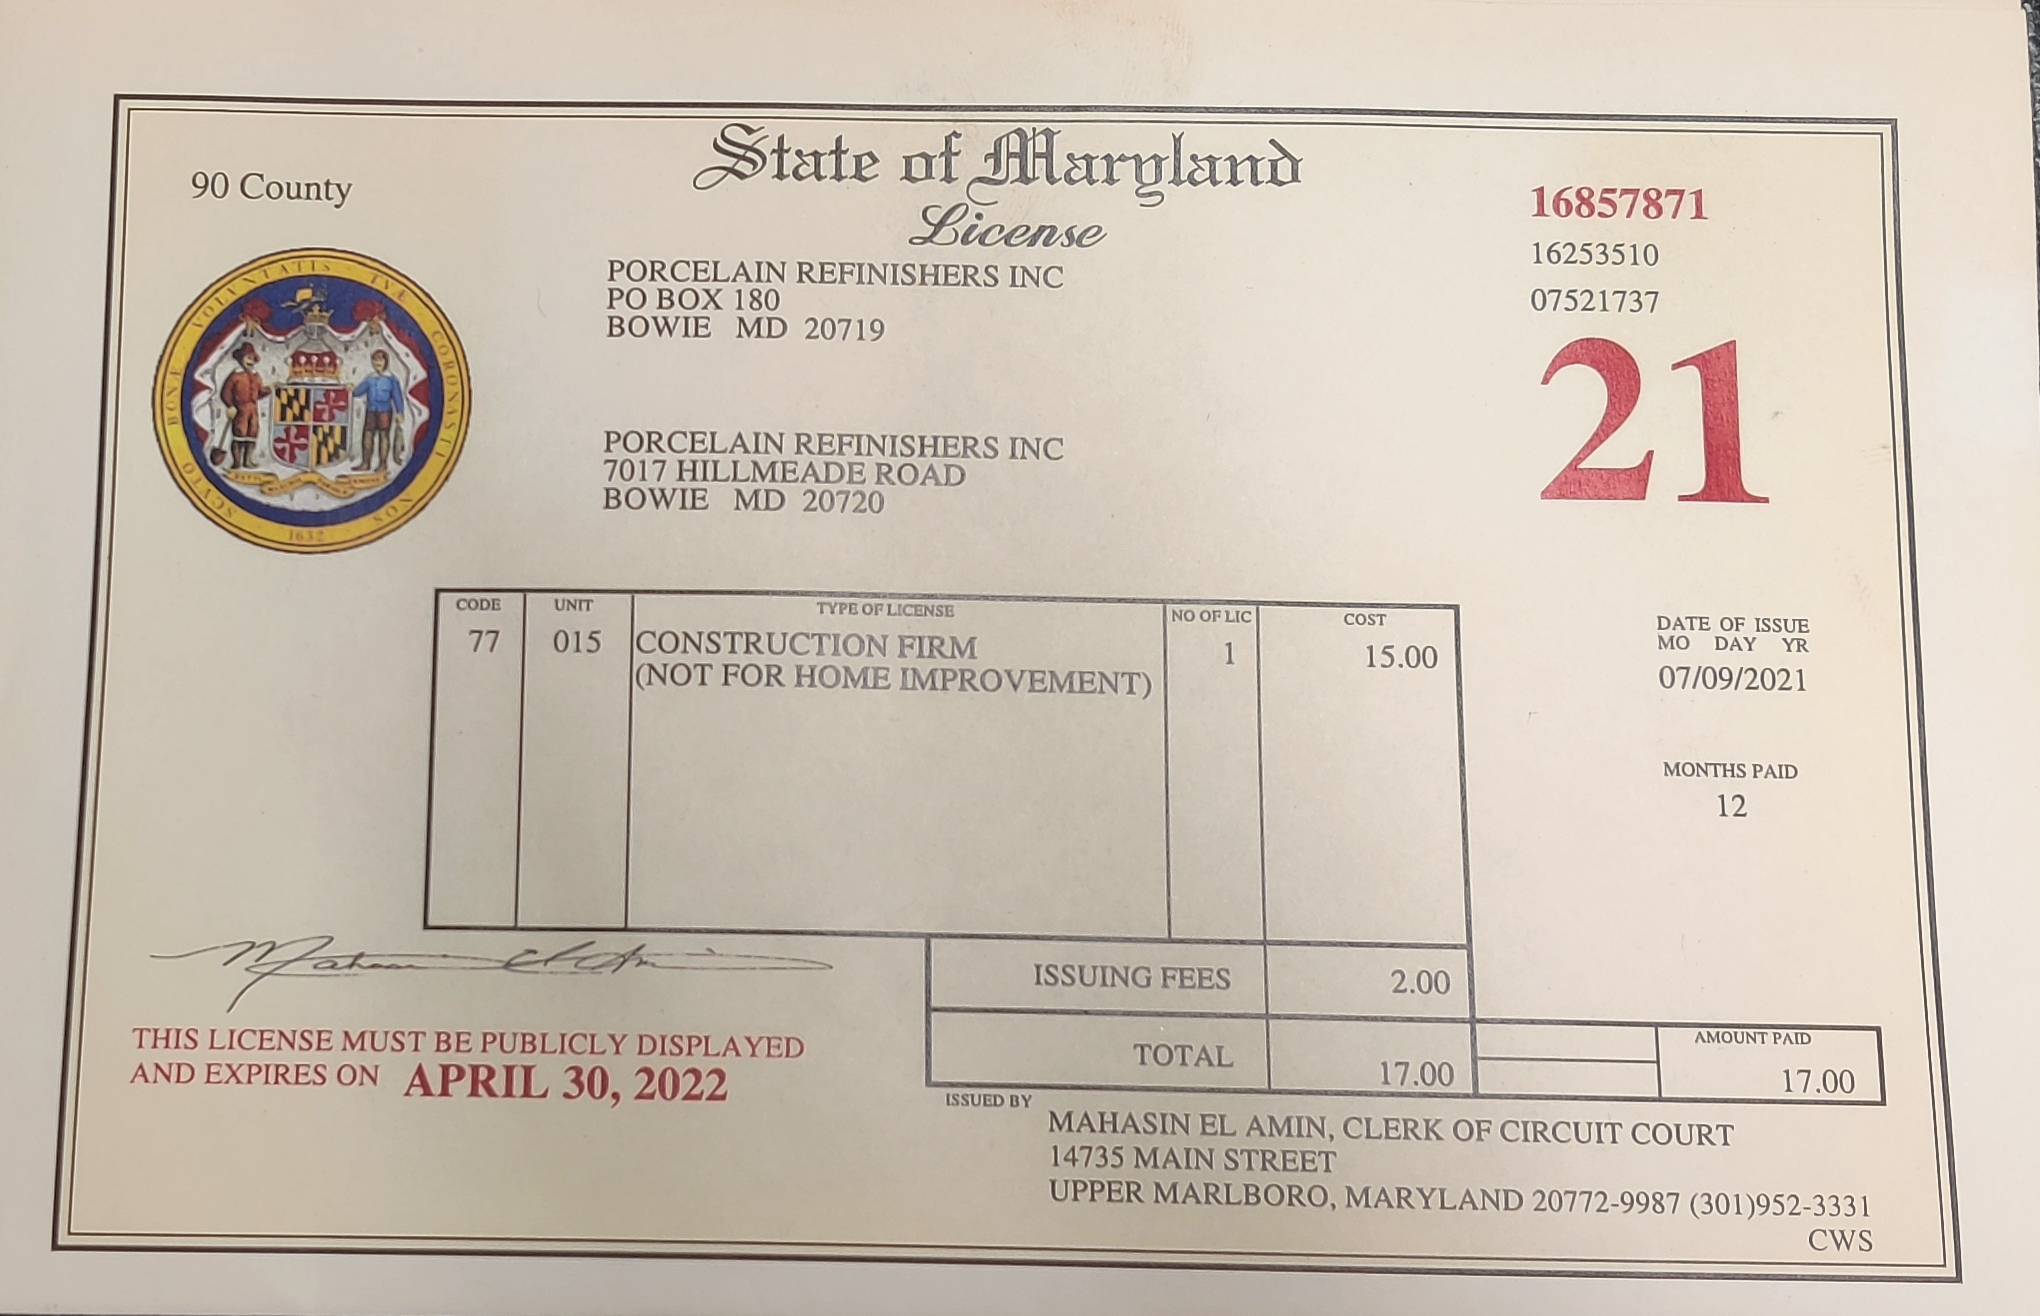 Our 2021 Business License